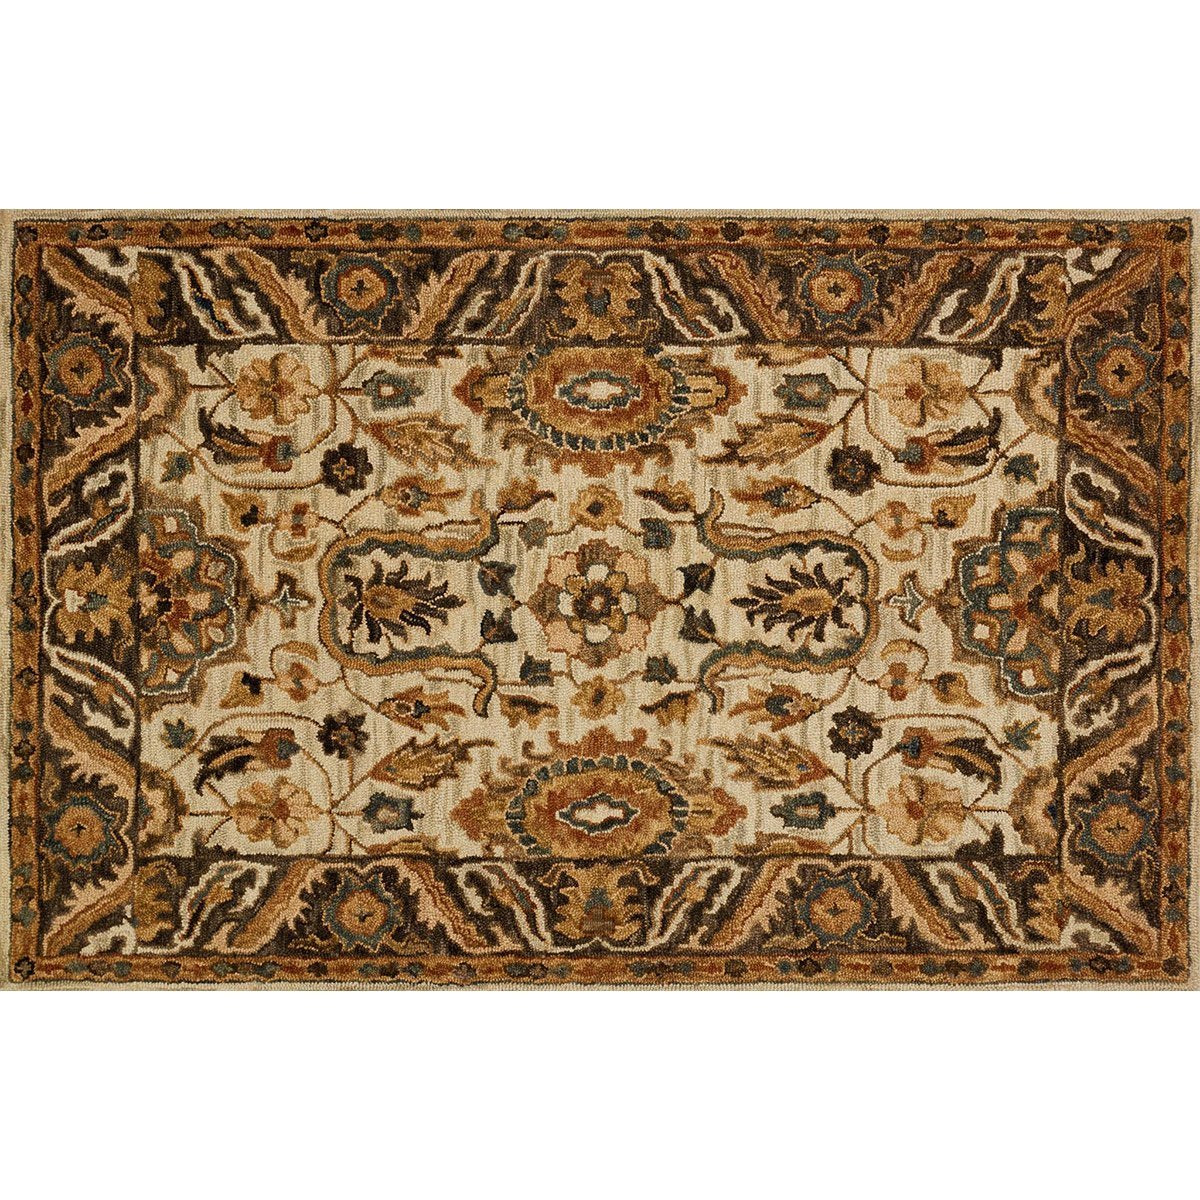 Loloi Victoria VK-02 Ivory and Dark Taupe Rug